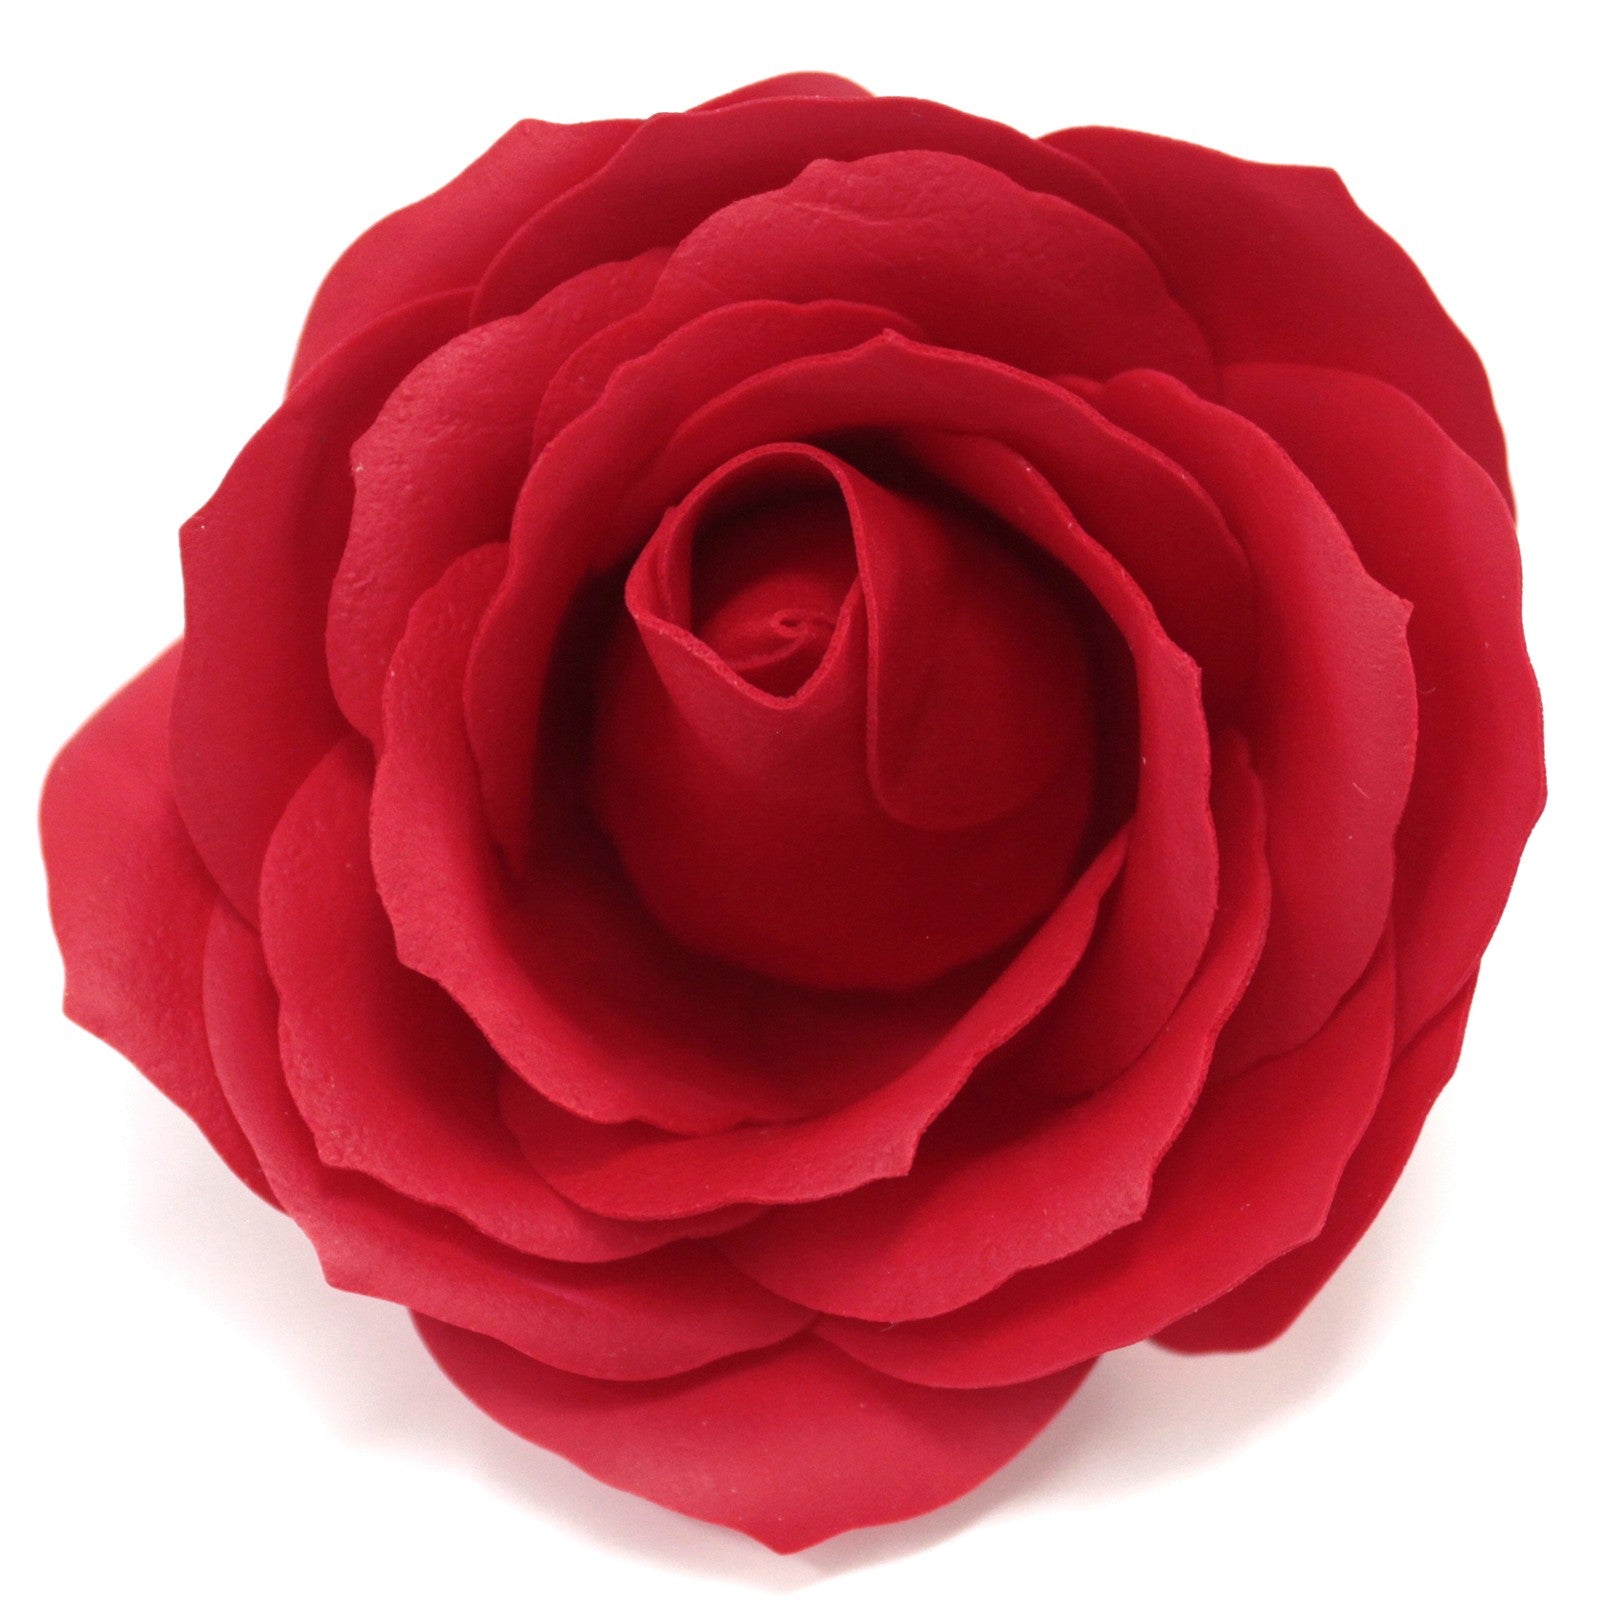 View Craft Soap Flowers Lrg Rose Red x 10 pcs information